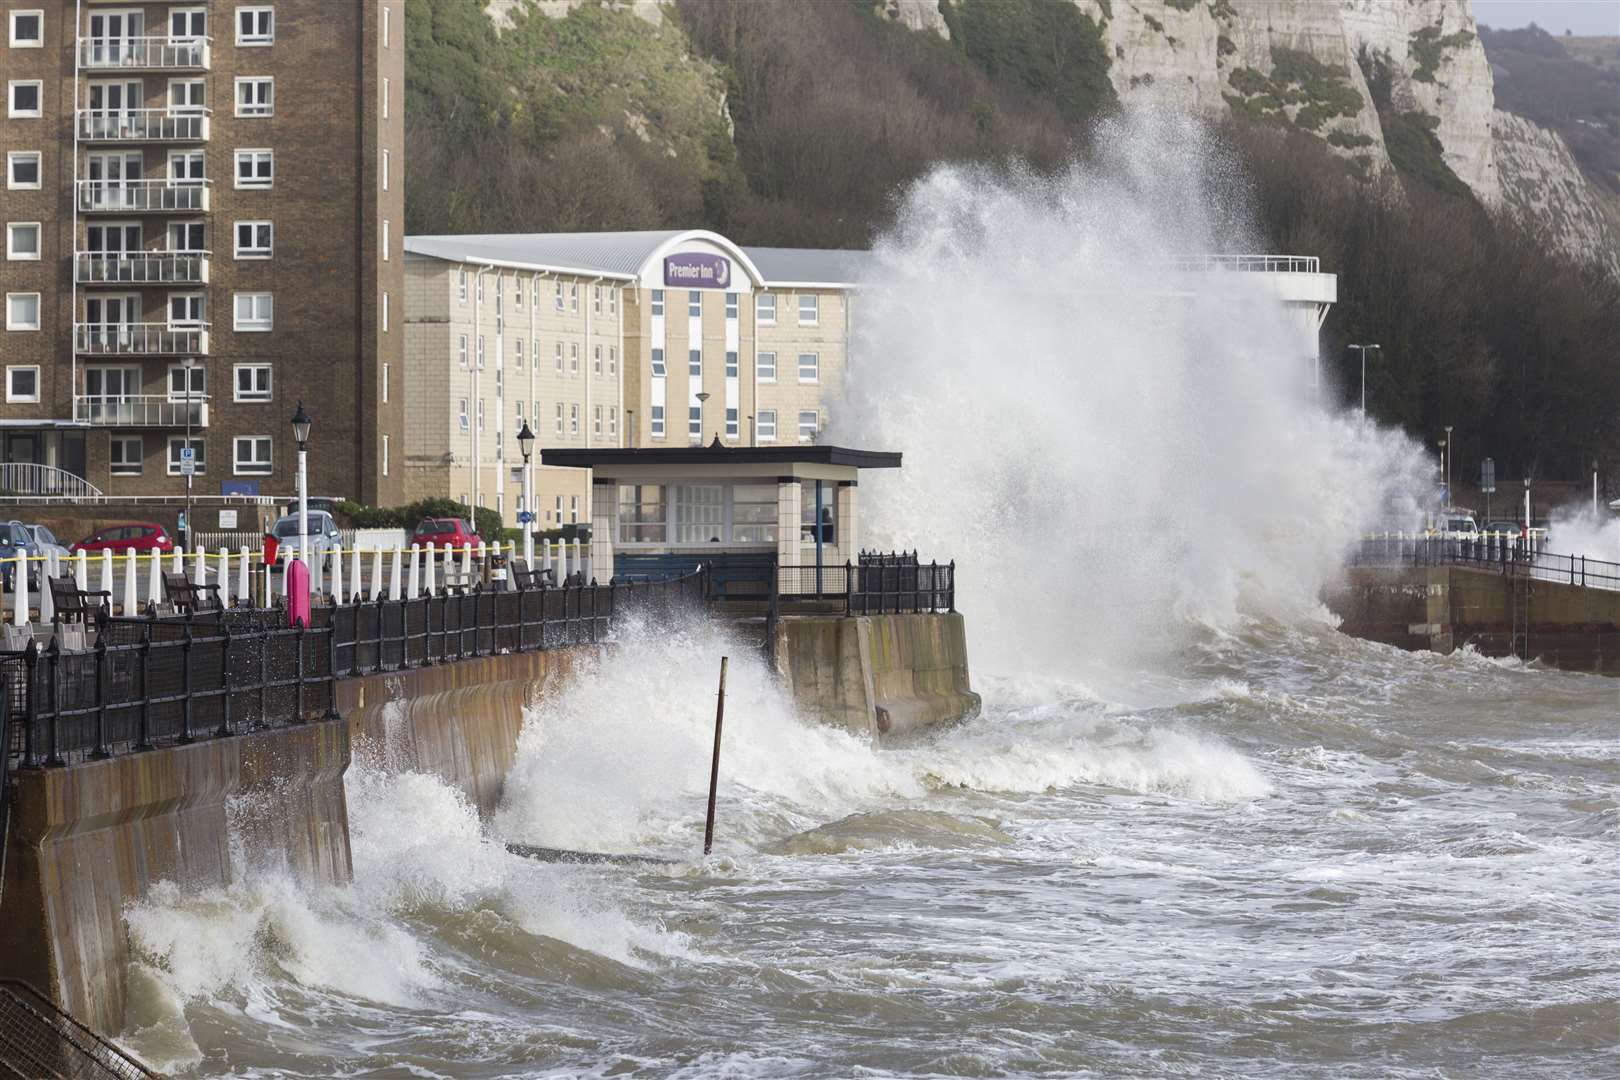 Ferries out of the Port of Dover are experiencing delays. Photo: Countrywide Photographic